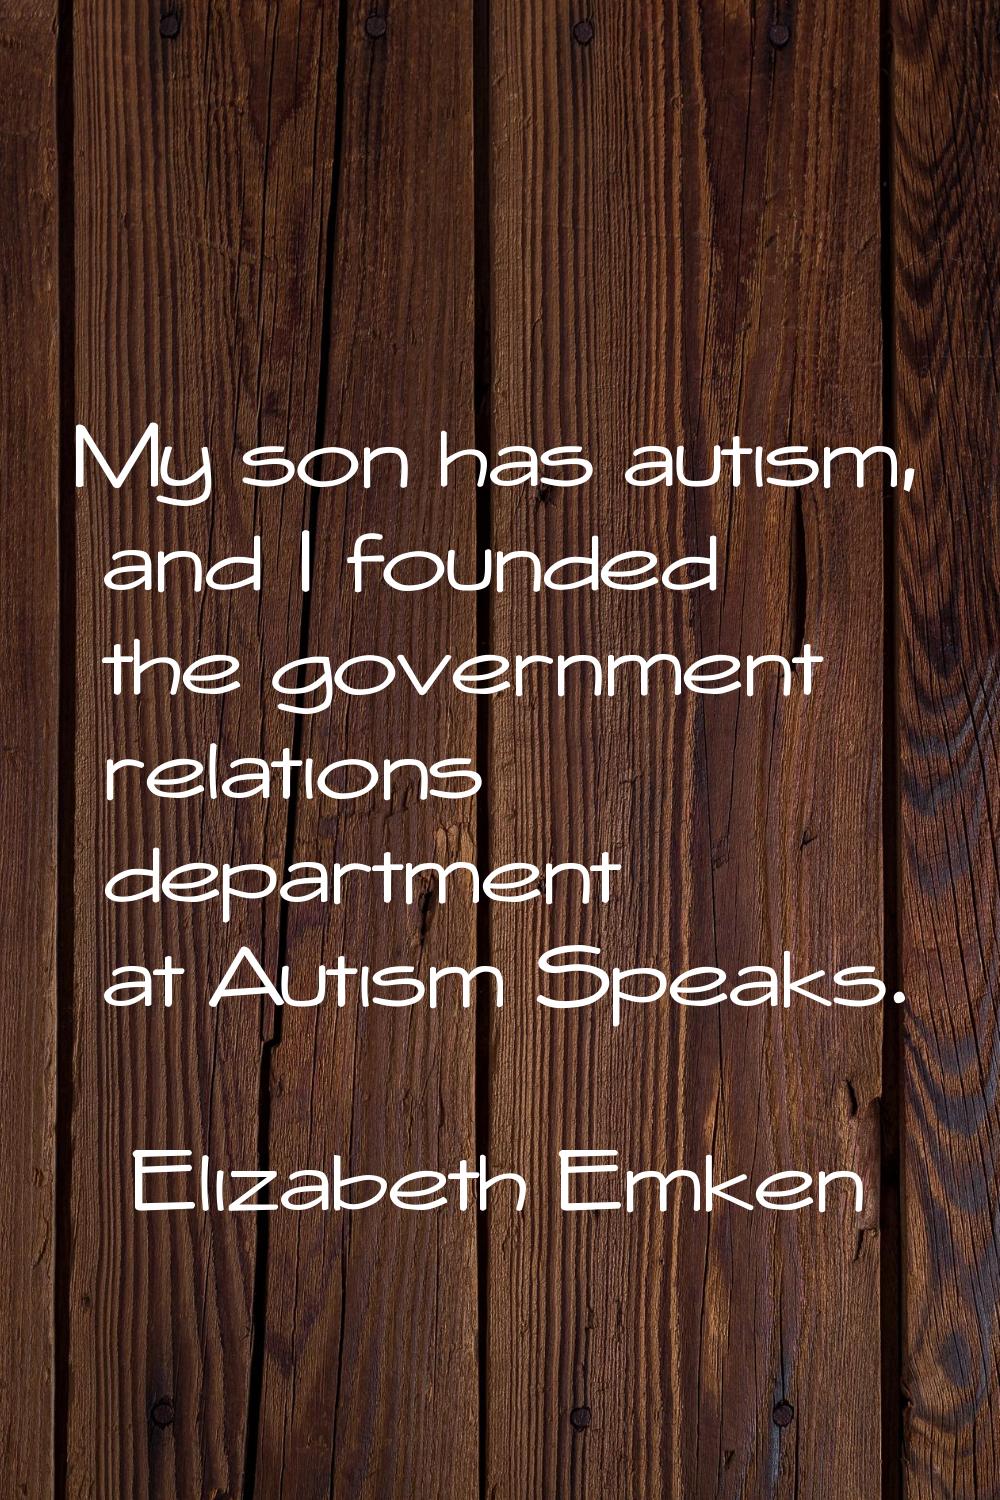 My son has autism, and I founded the government relations department at Autism Speaks.